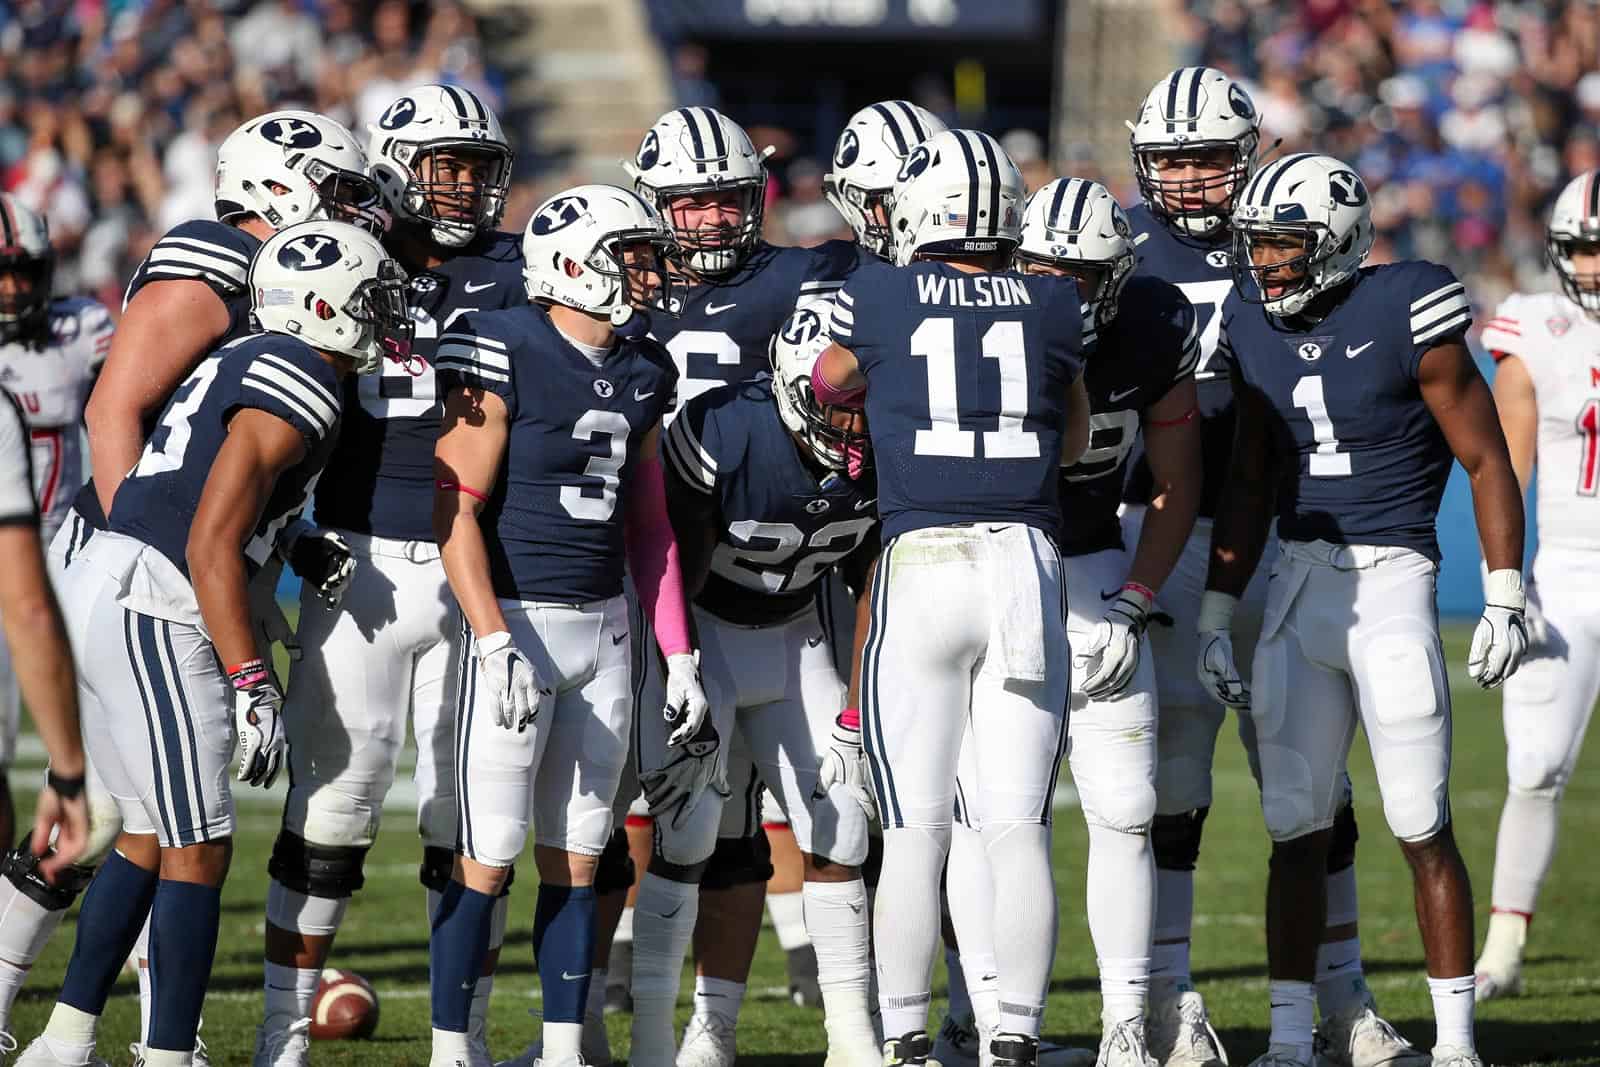 Should BYU count as a Power 5 opponent?